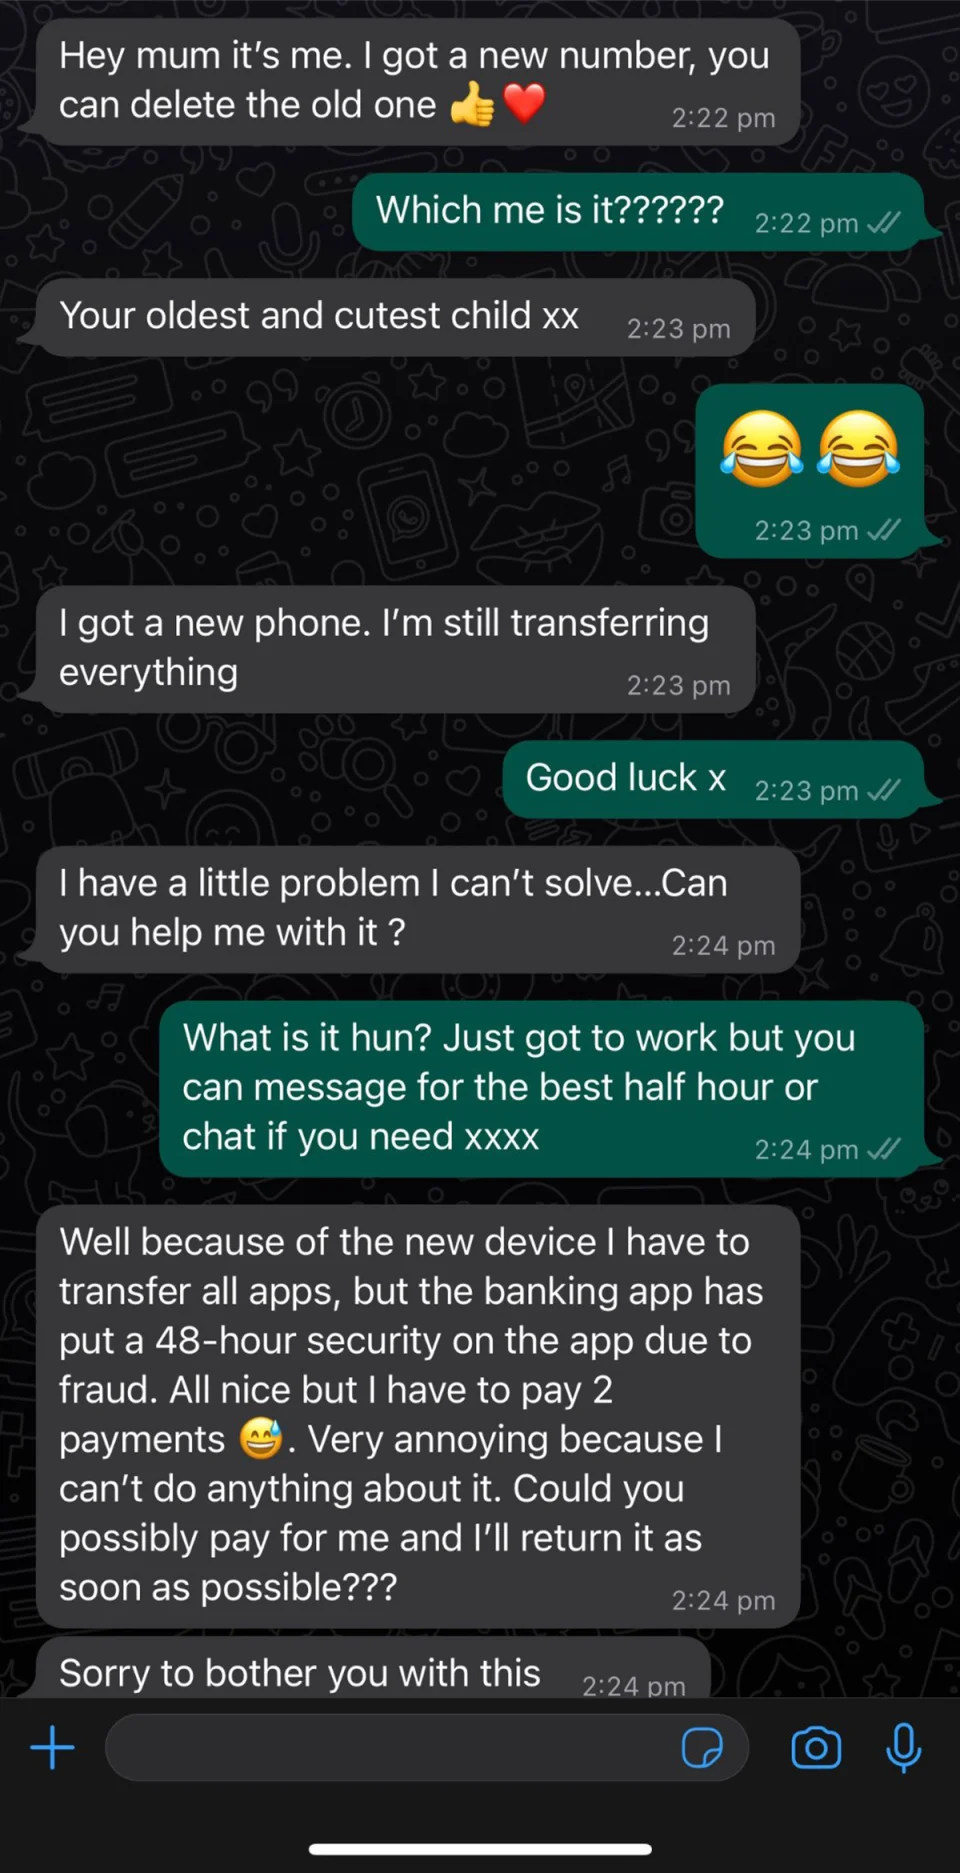 Screenshot from WhatsApp chat with Mum/Dad scam in action with victim